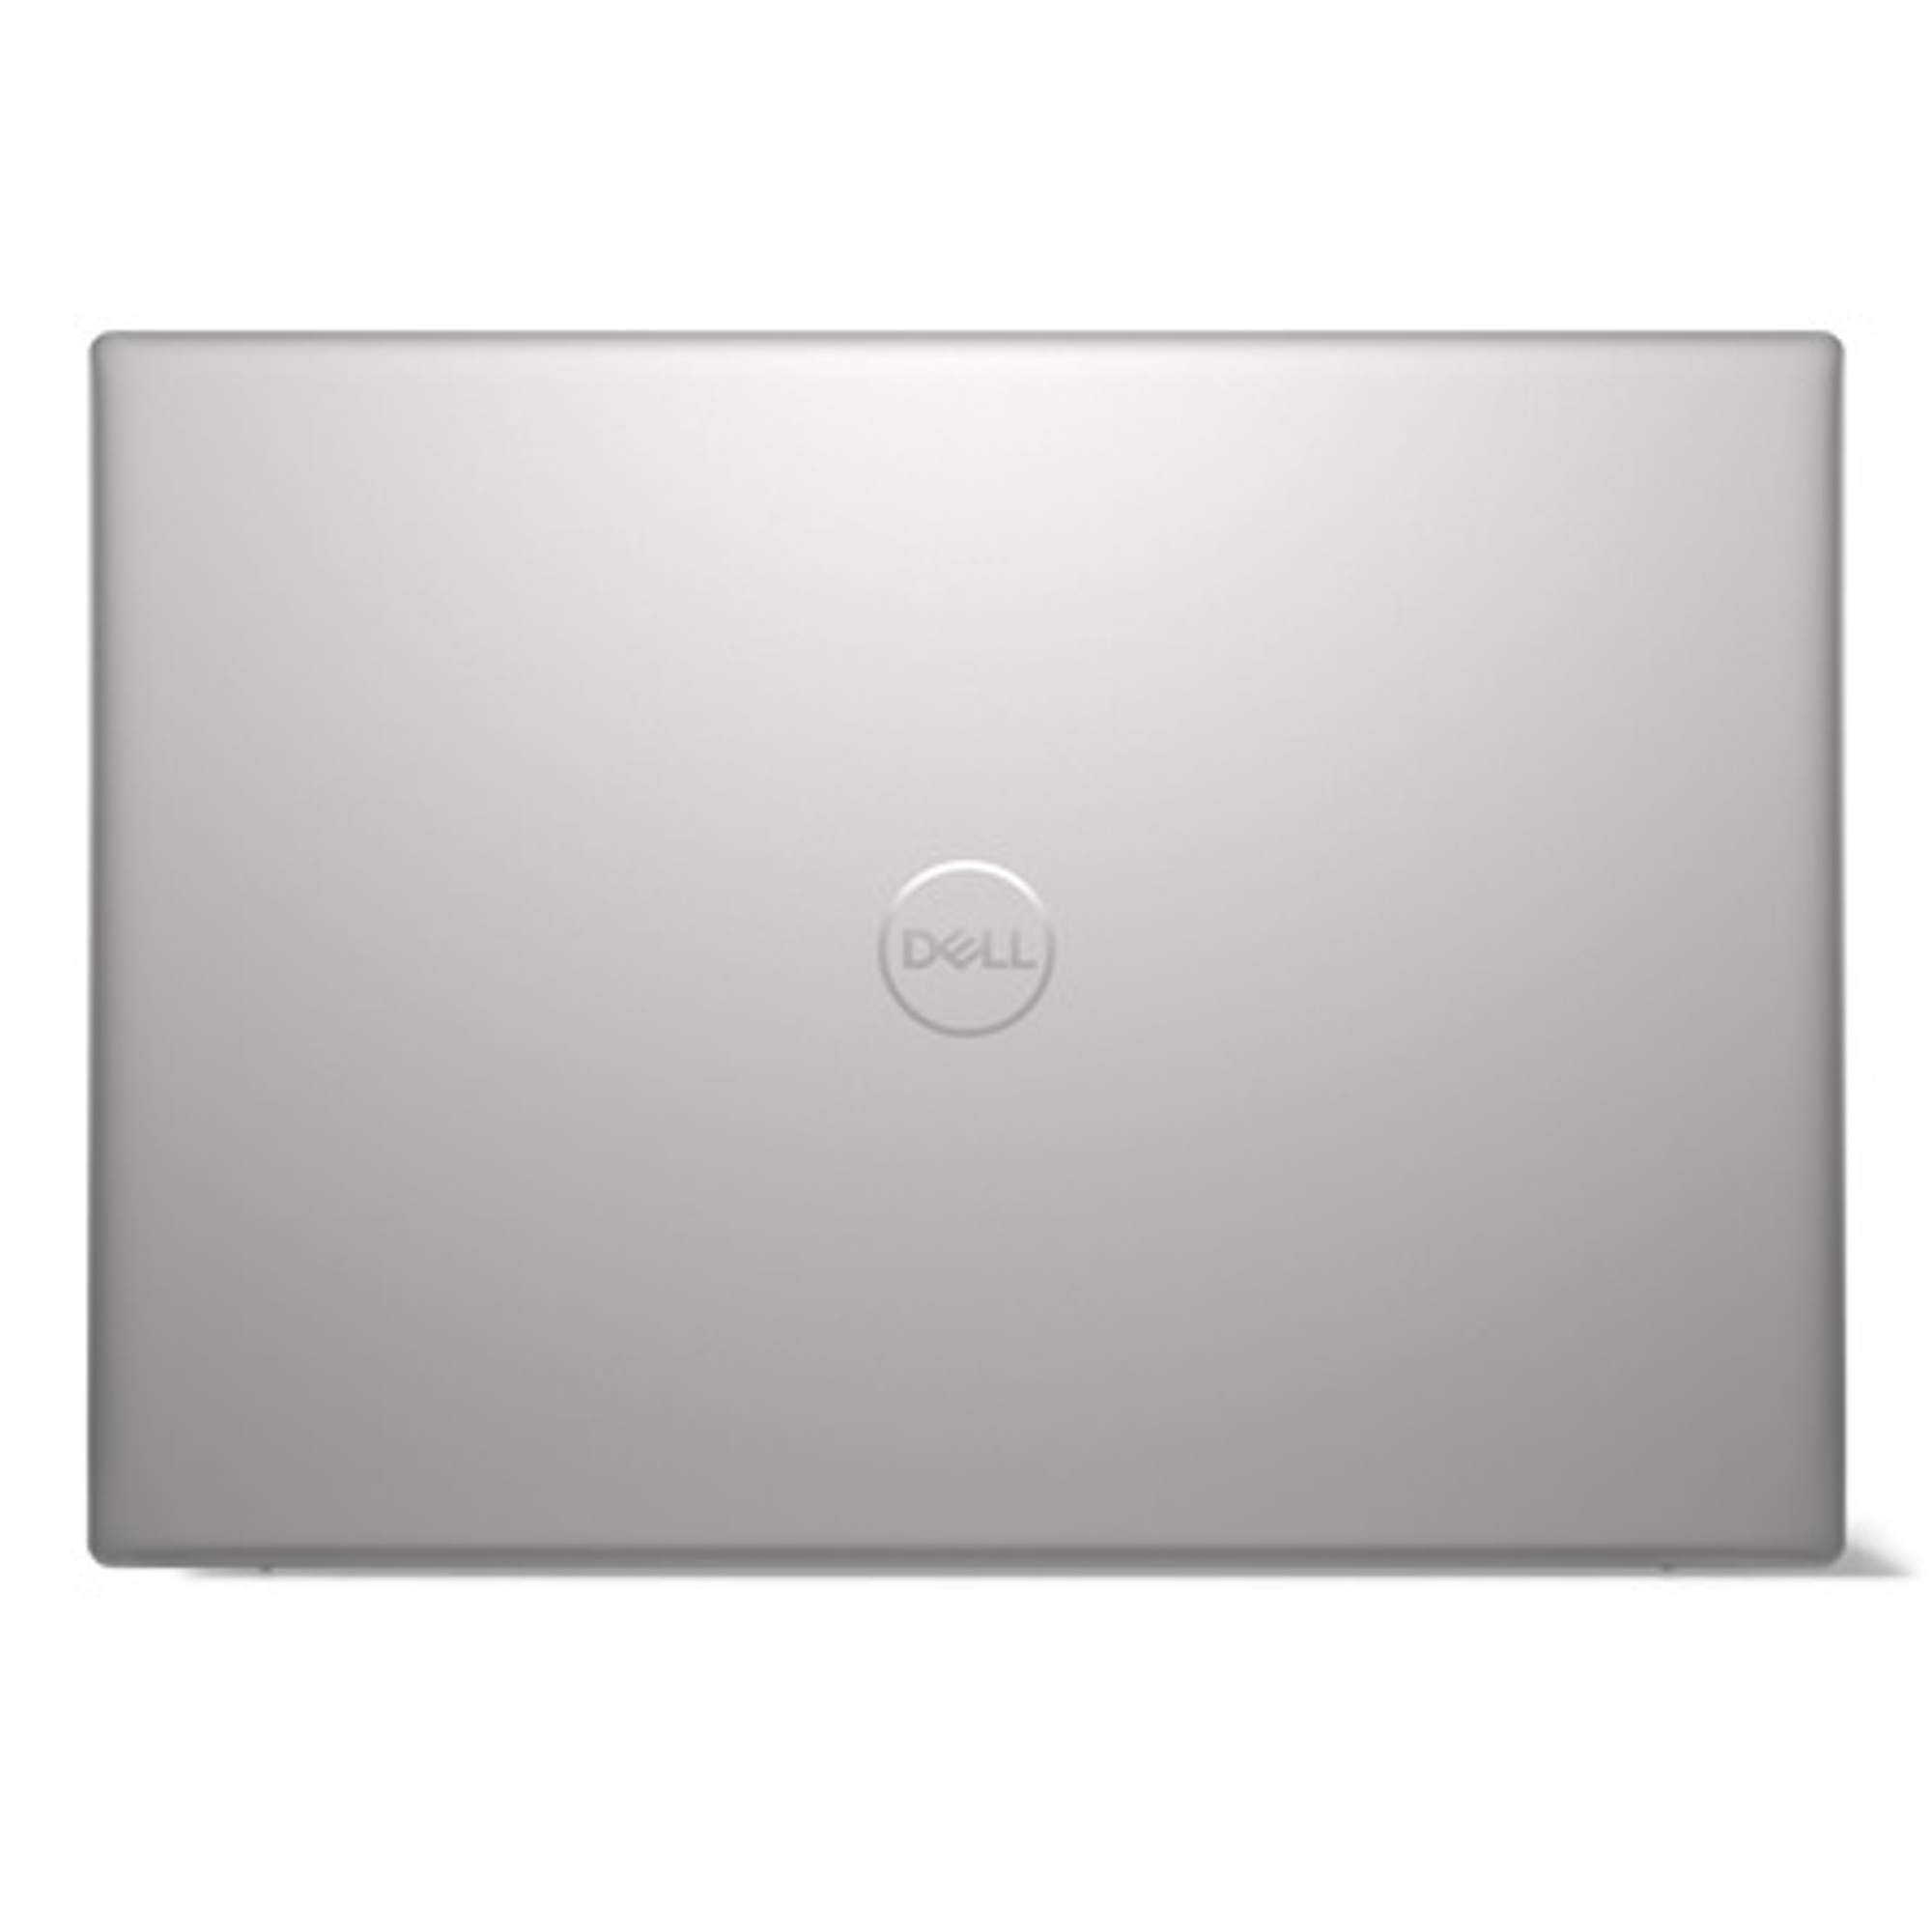 DELL 5630_336174 Laptop / Notebook 7